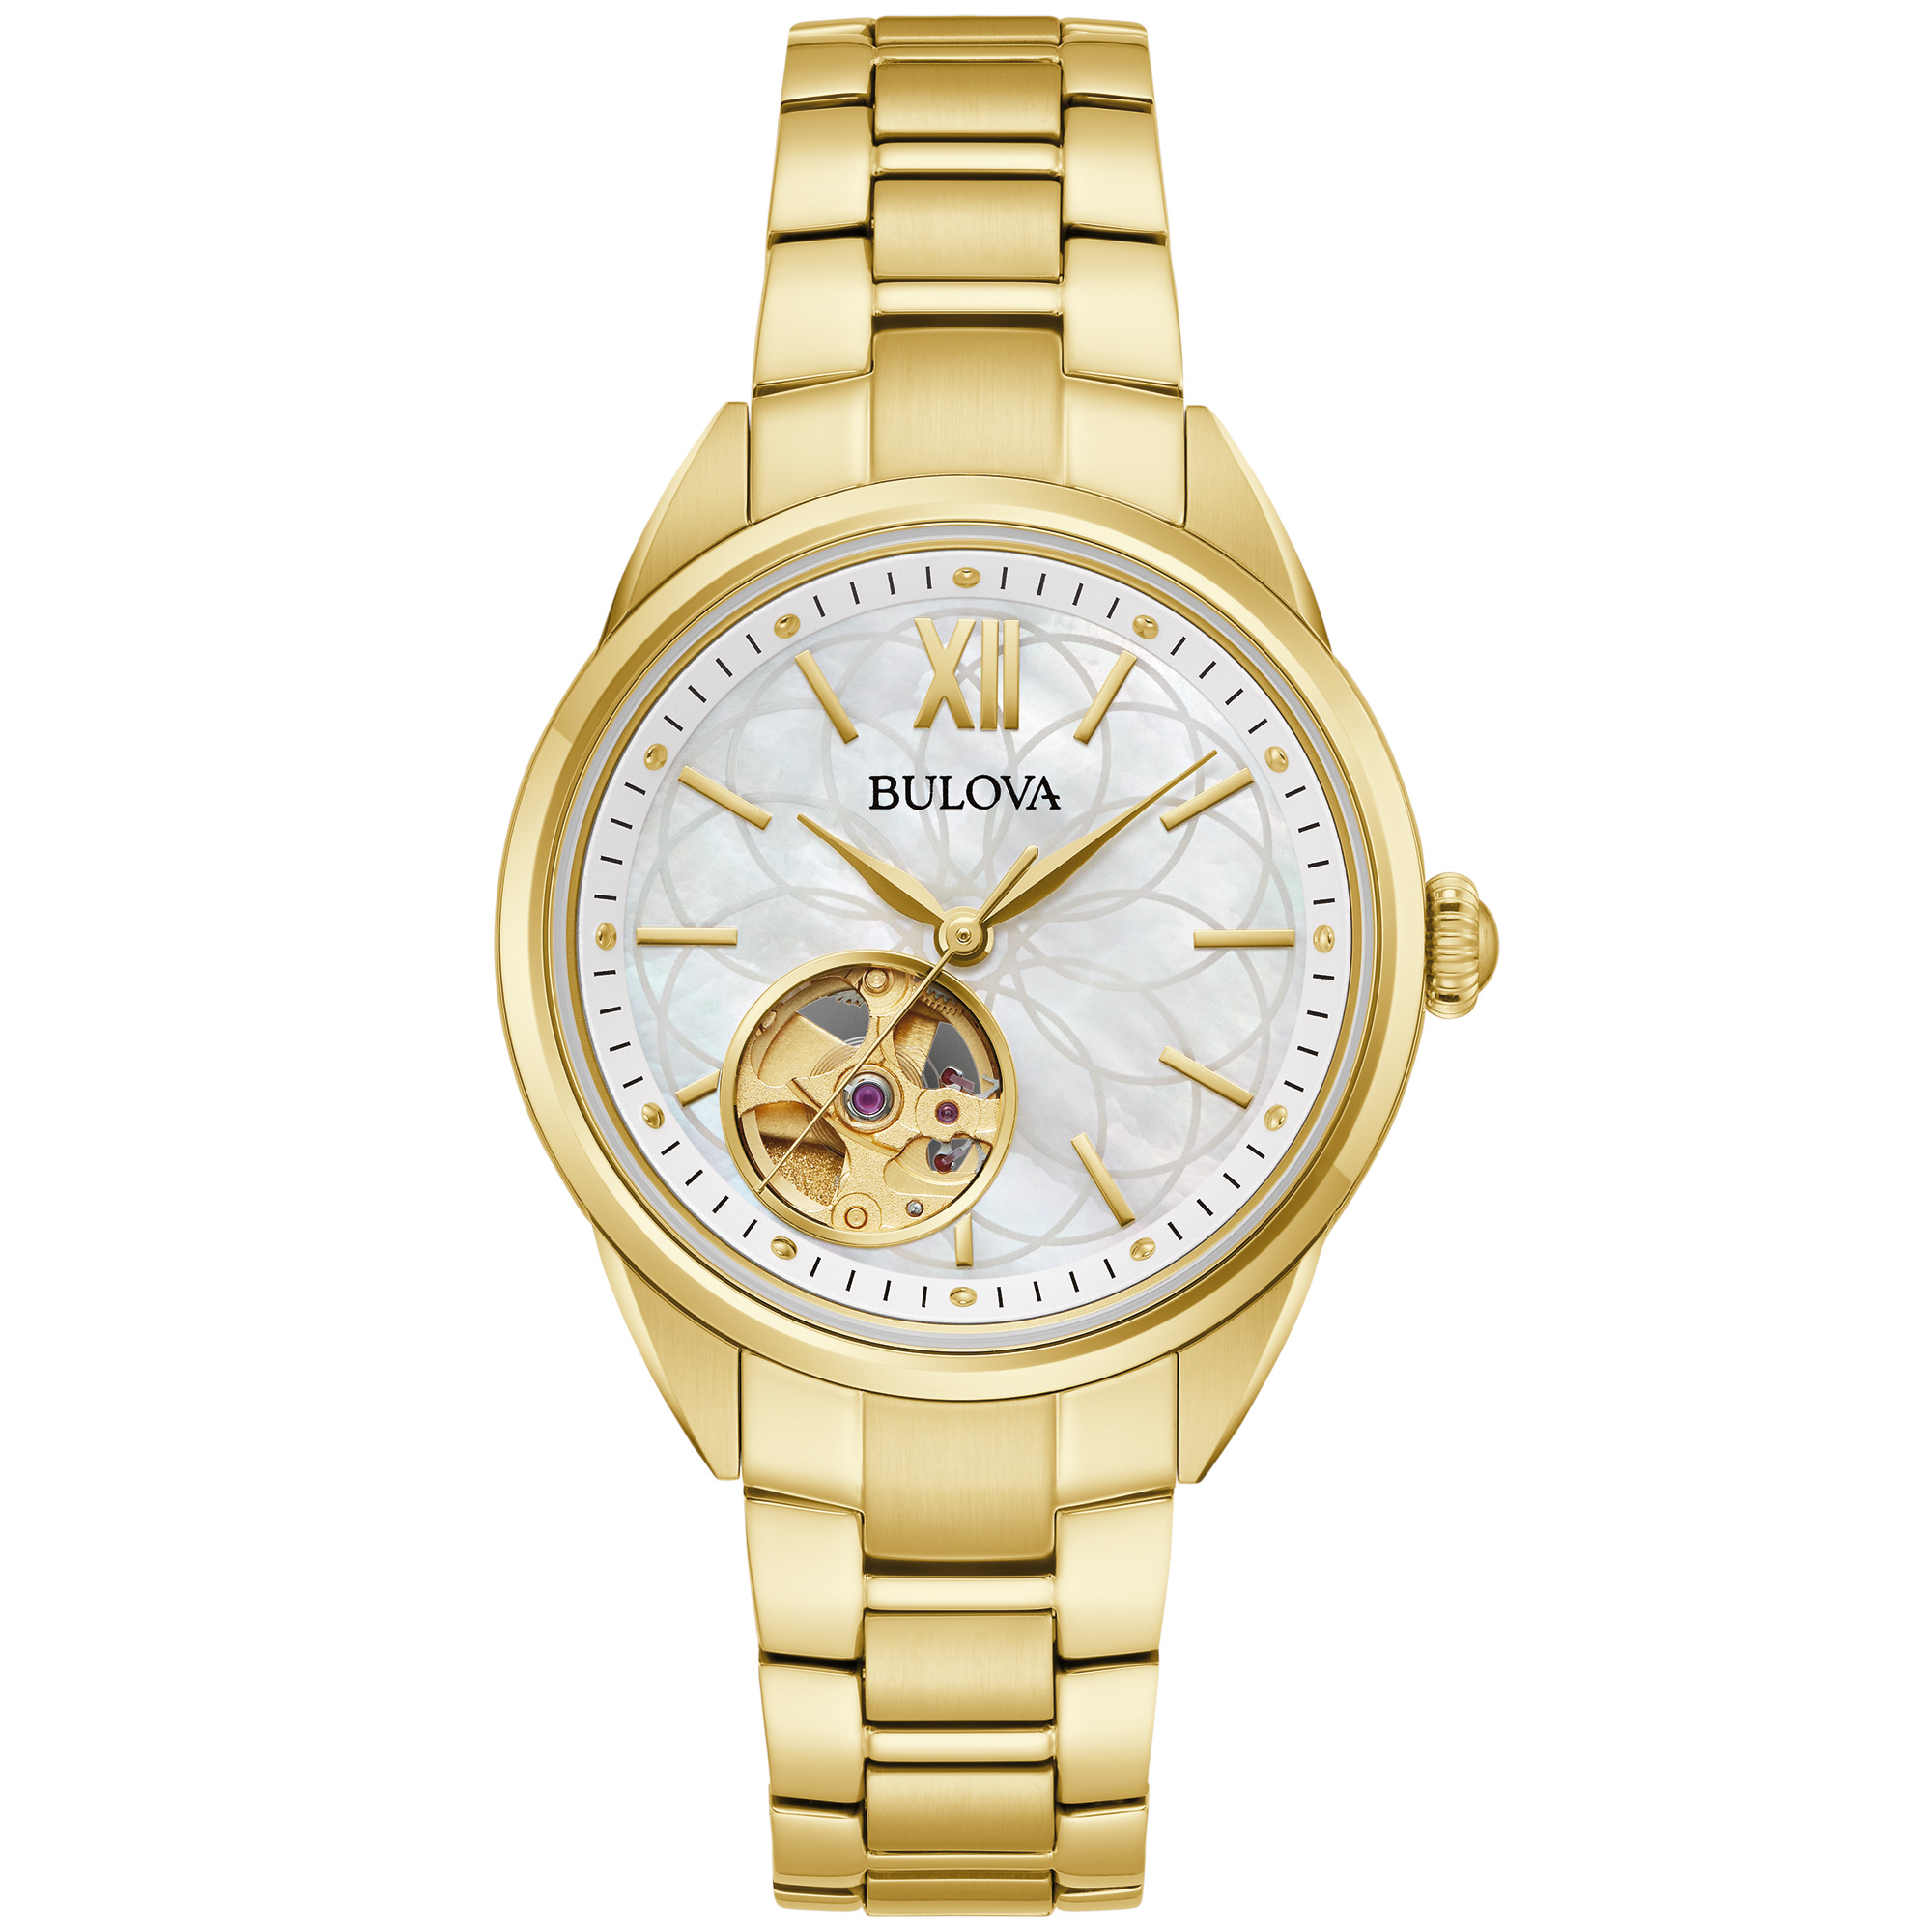 Sutton Automatic Mother-of-Pearl Dial Gold-Tone Bracelet Watch 34.5mm - Bulova 97L172